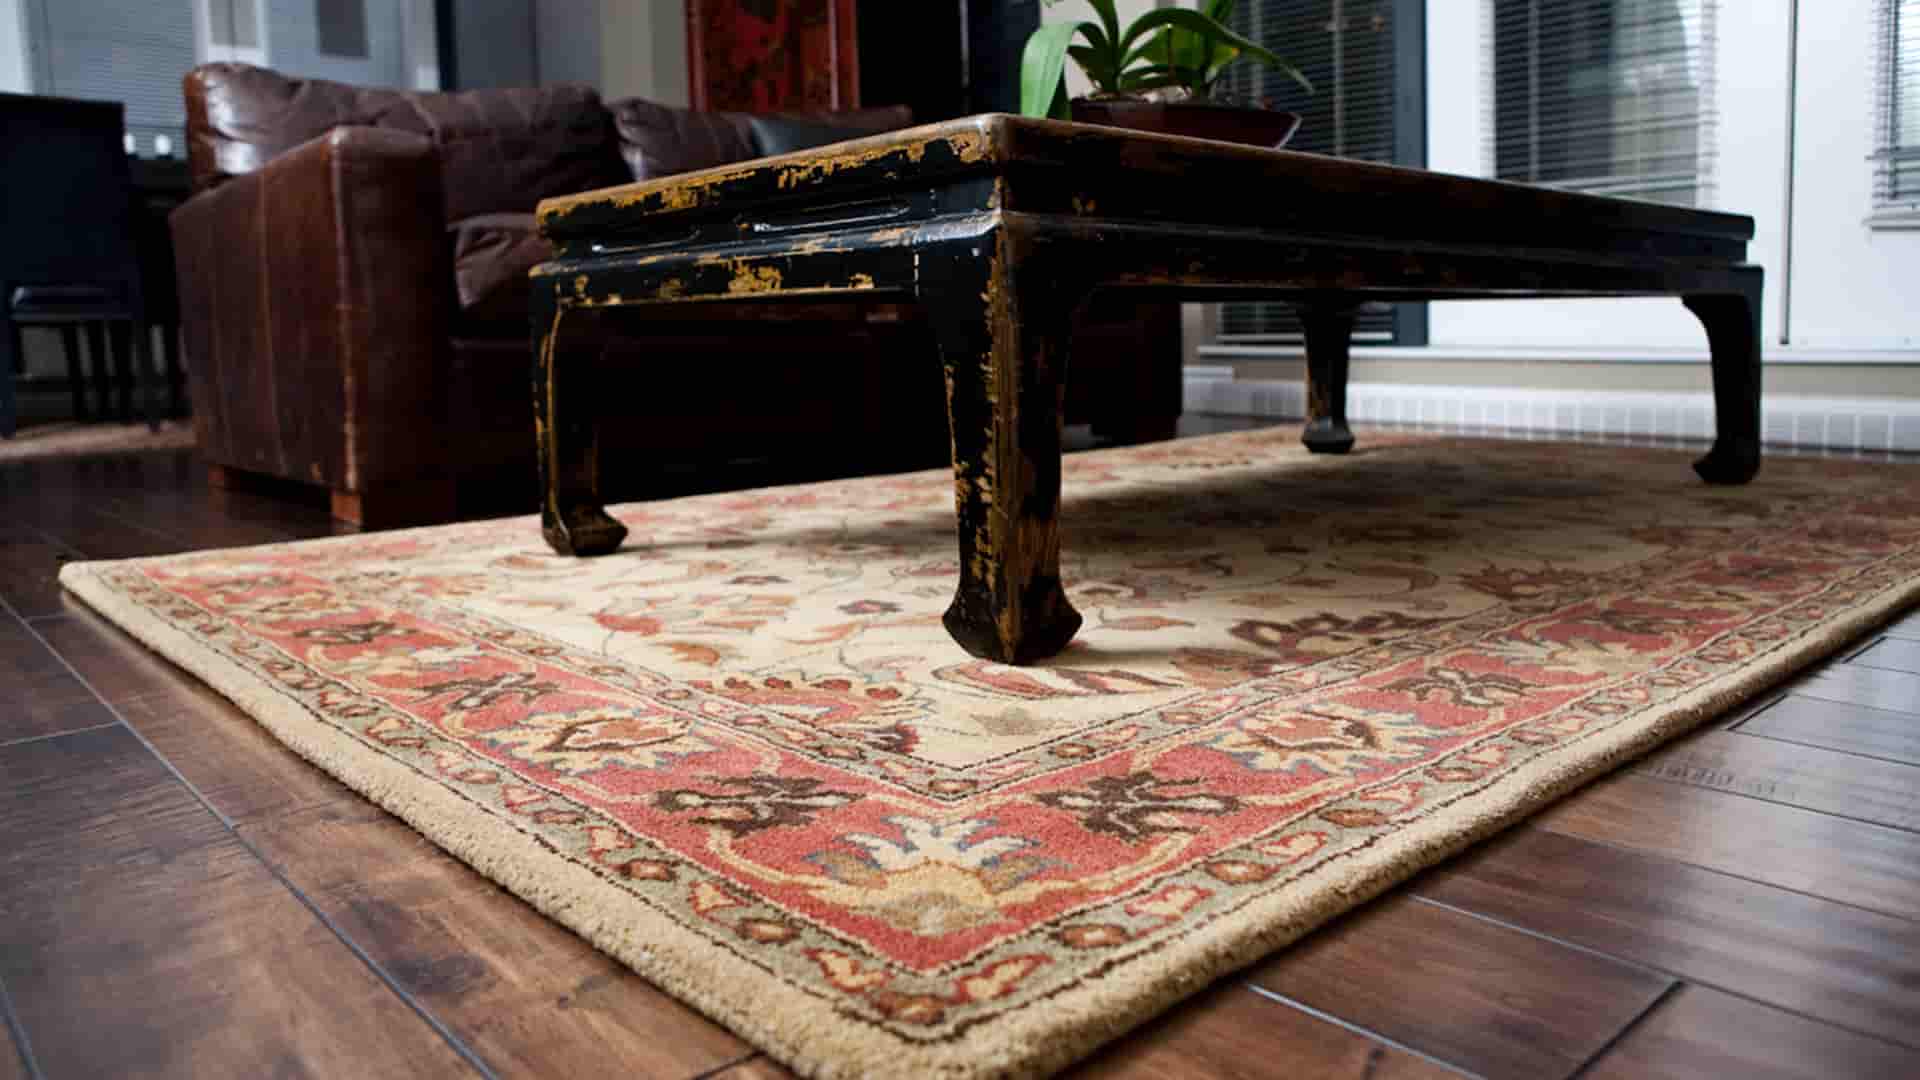 Redefining Affordability with Quality Carpets and Rugs in the USA